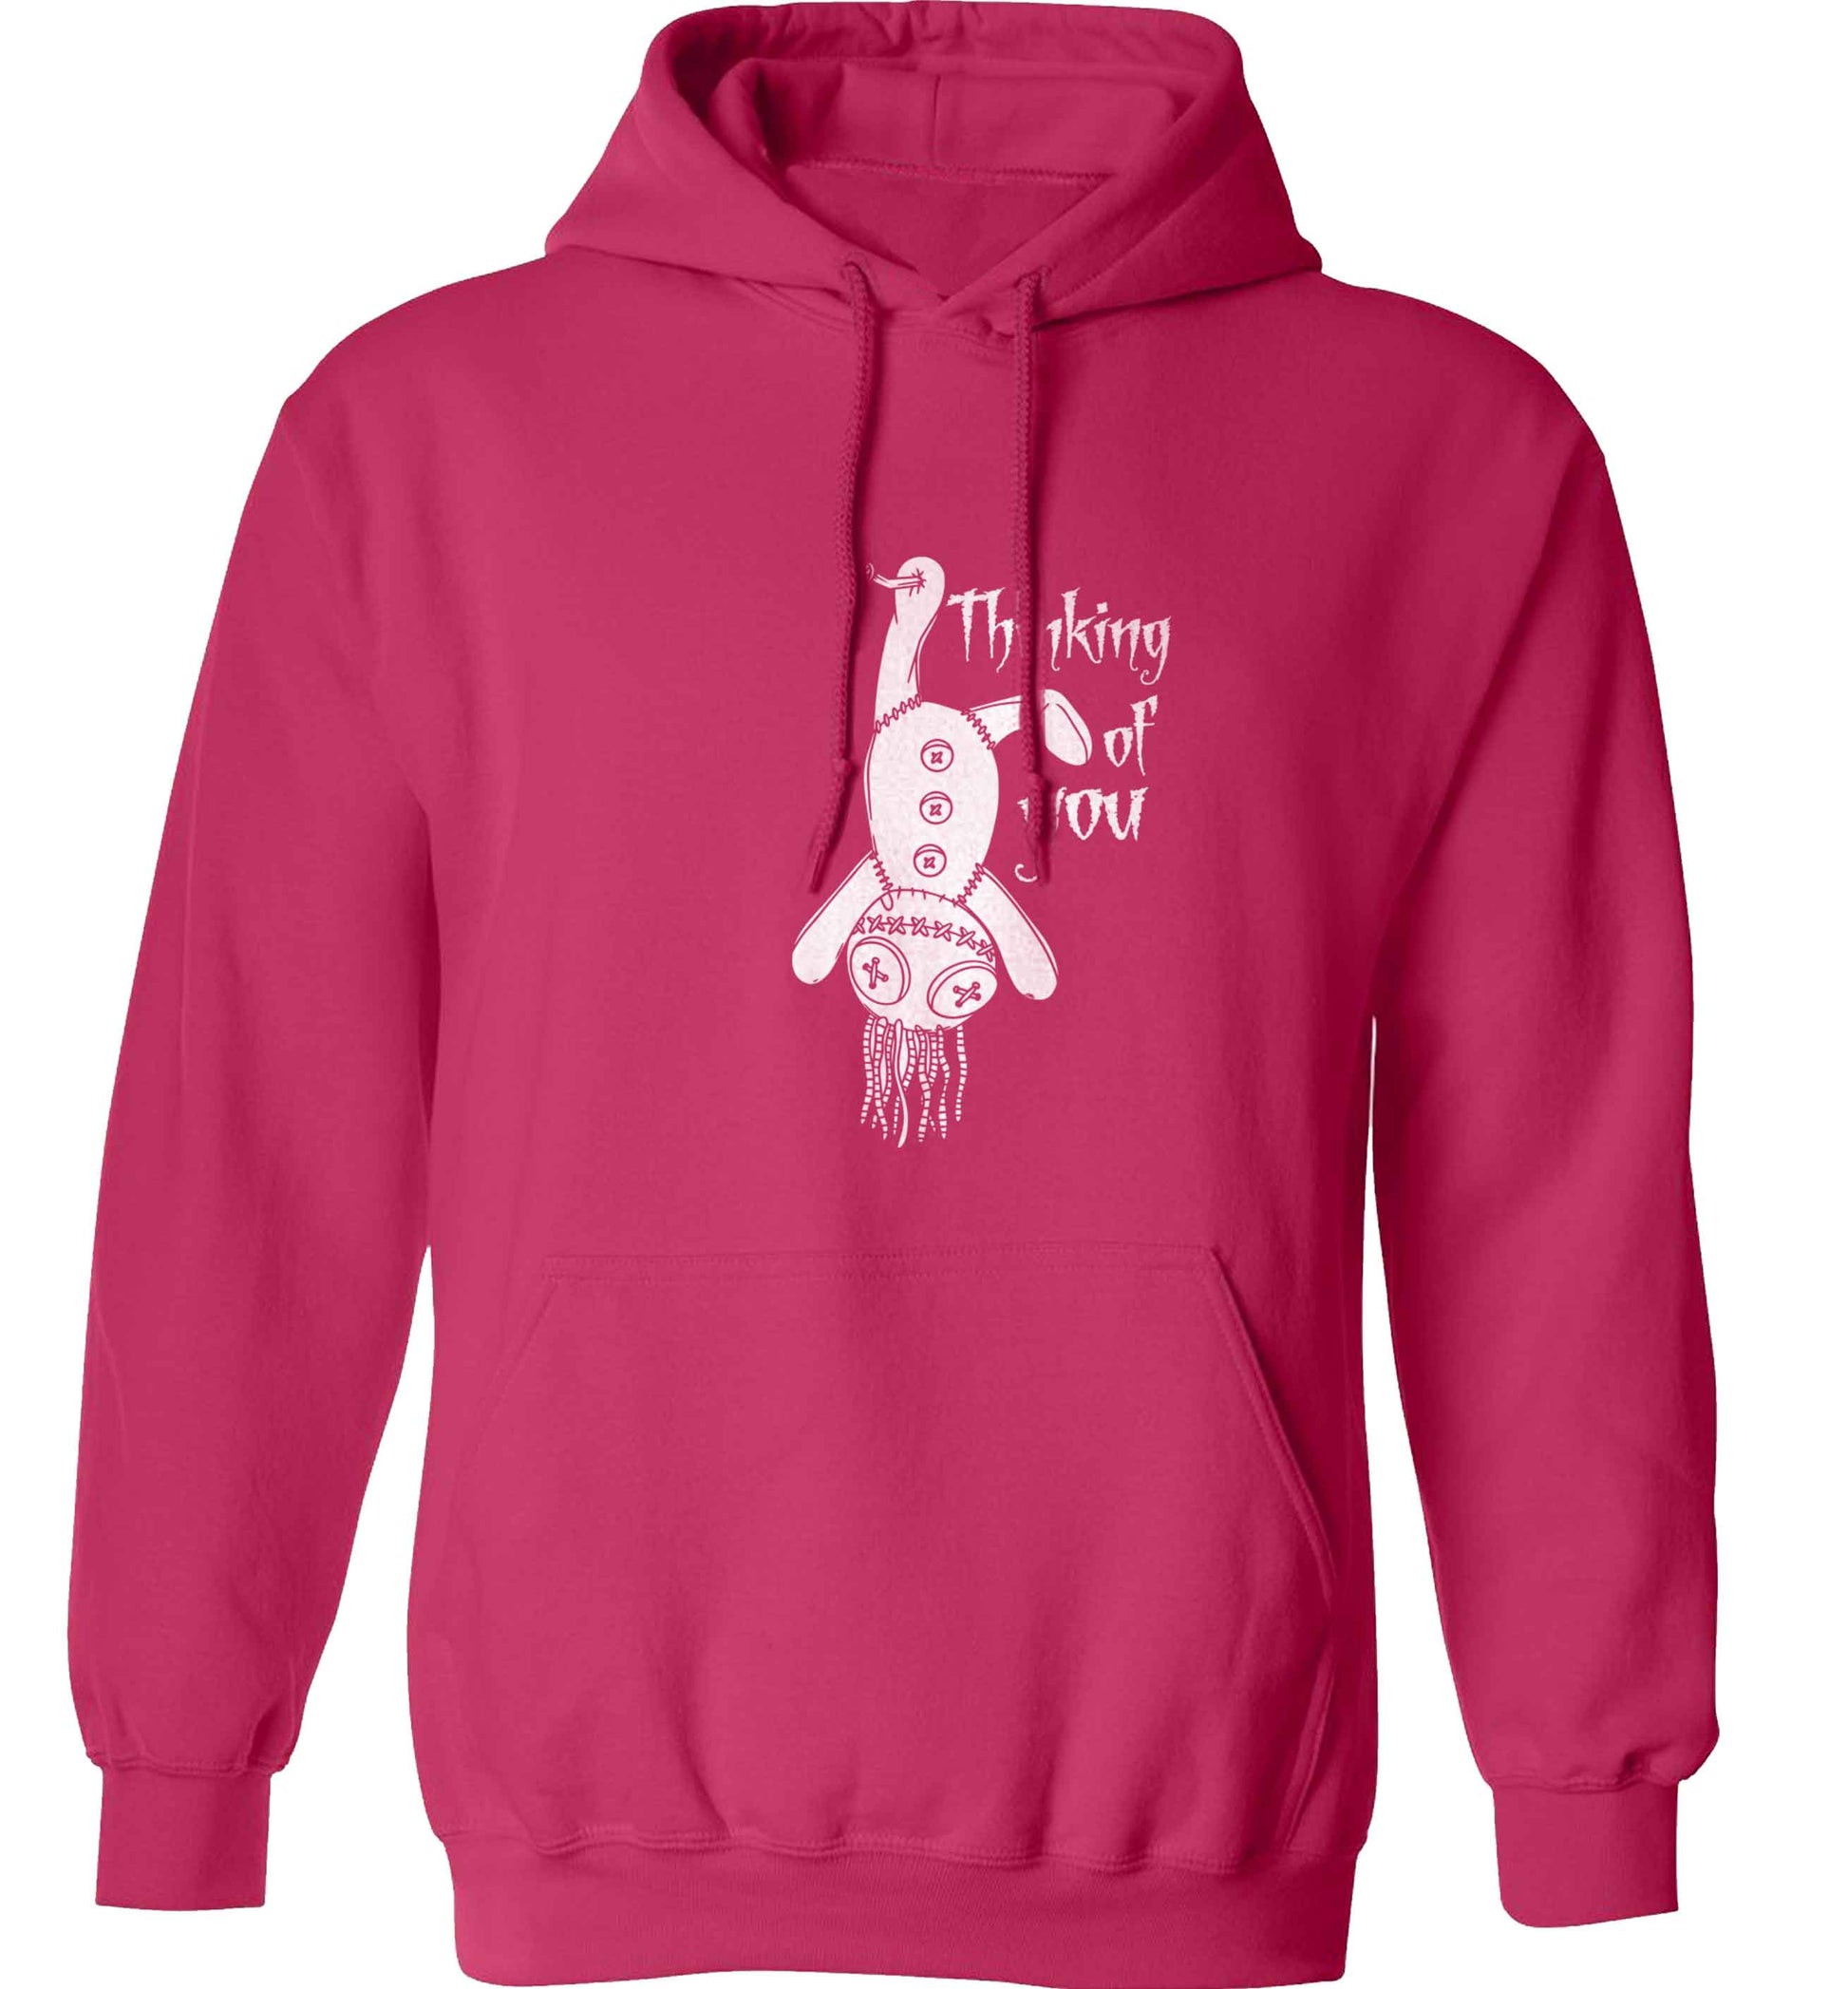 Thinking of you adults unisex pink hoodie 2XL